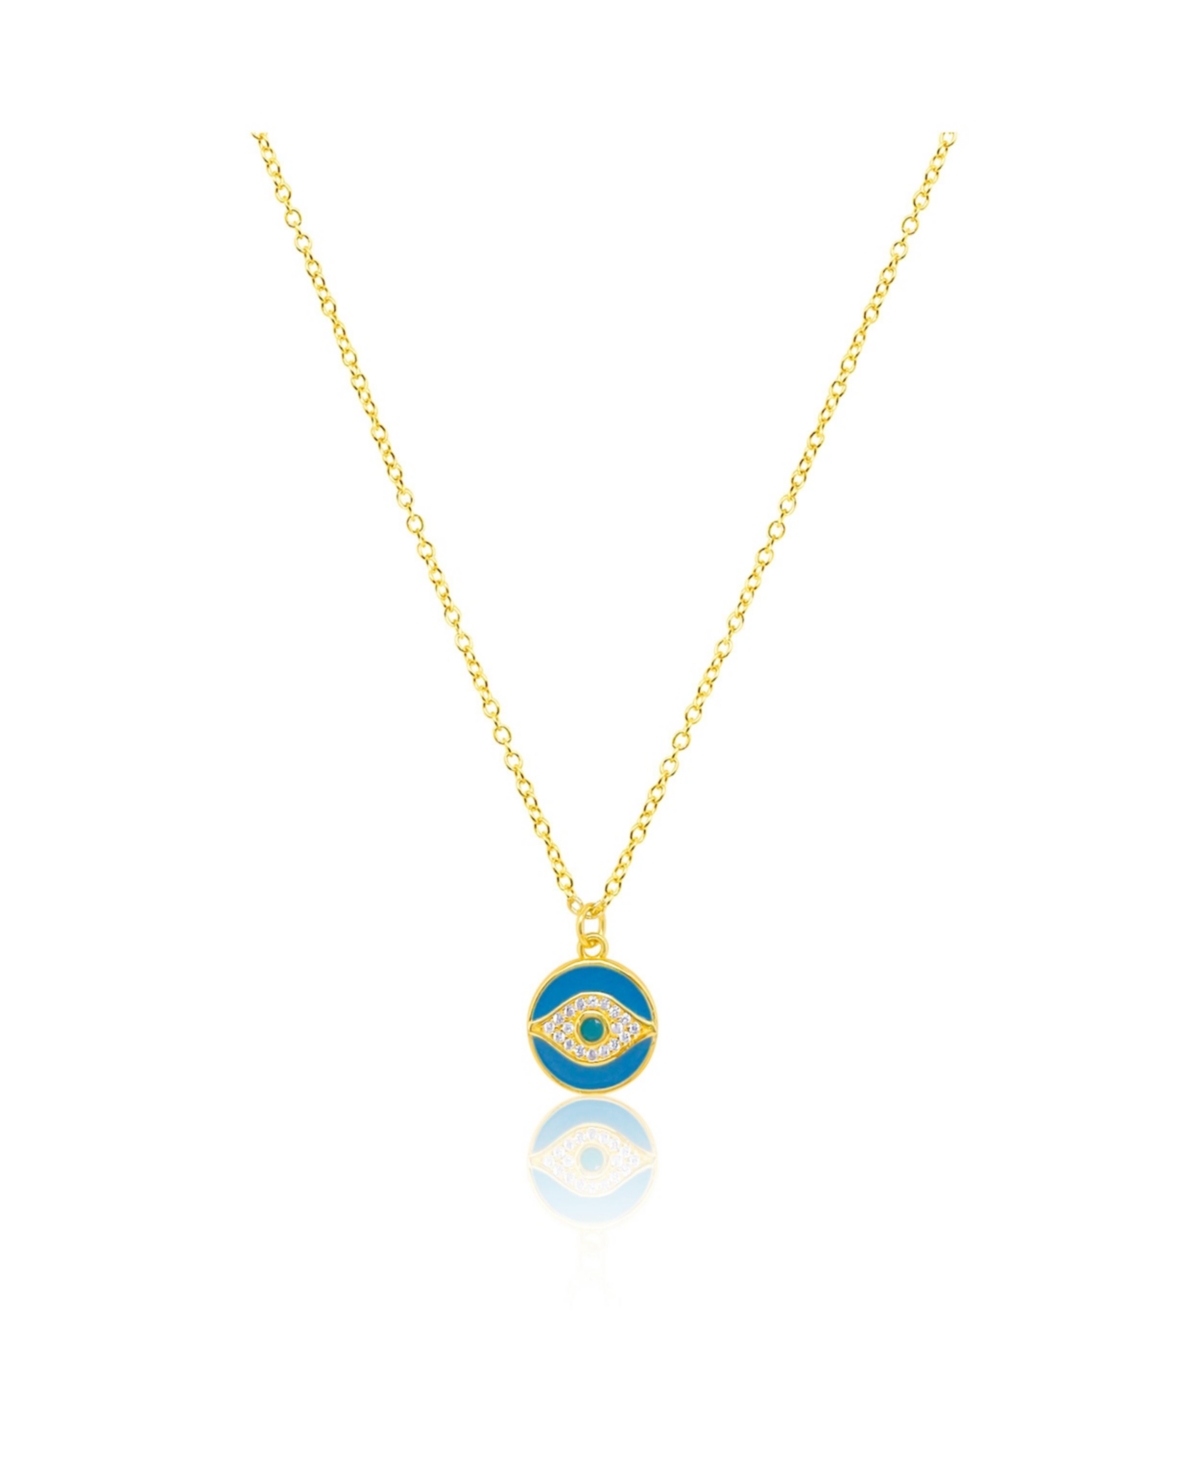 Yellow Gold Tone Enamel and Cz Evil Eye Necklace - Yellow